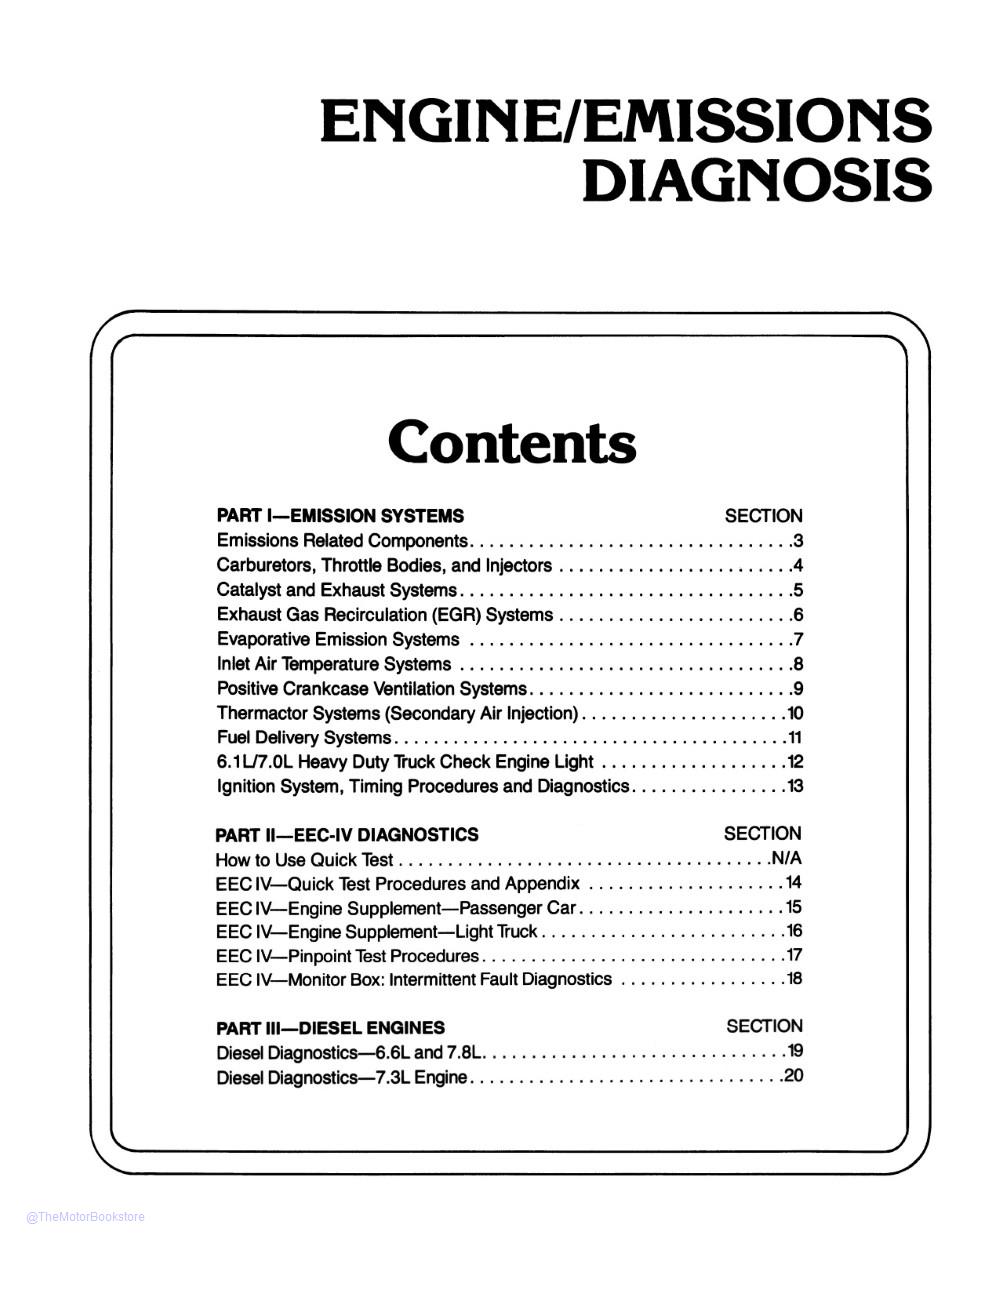 1989 Ford Car / Truck Emissions Diagnosis Shop Manual  - Table of Contents